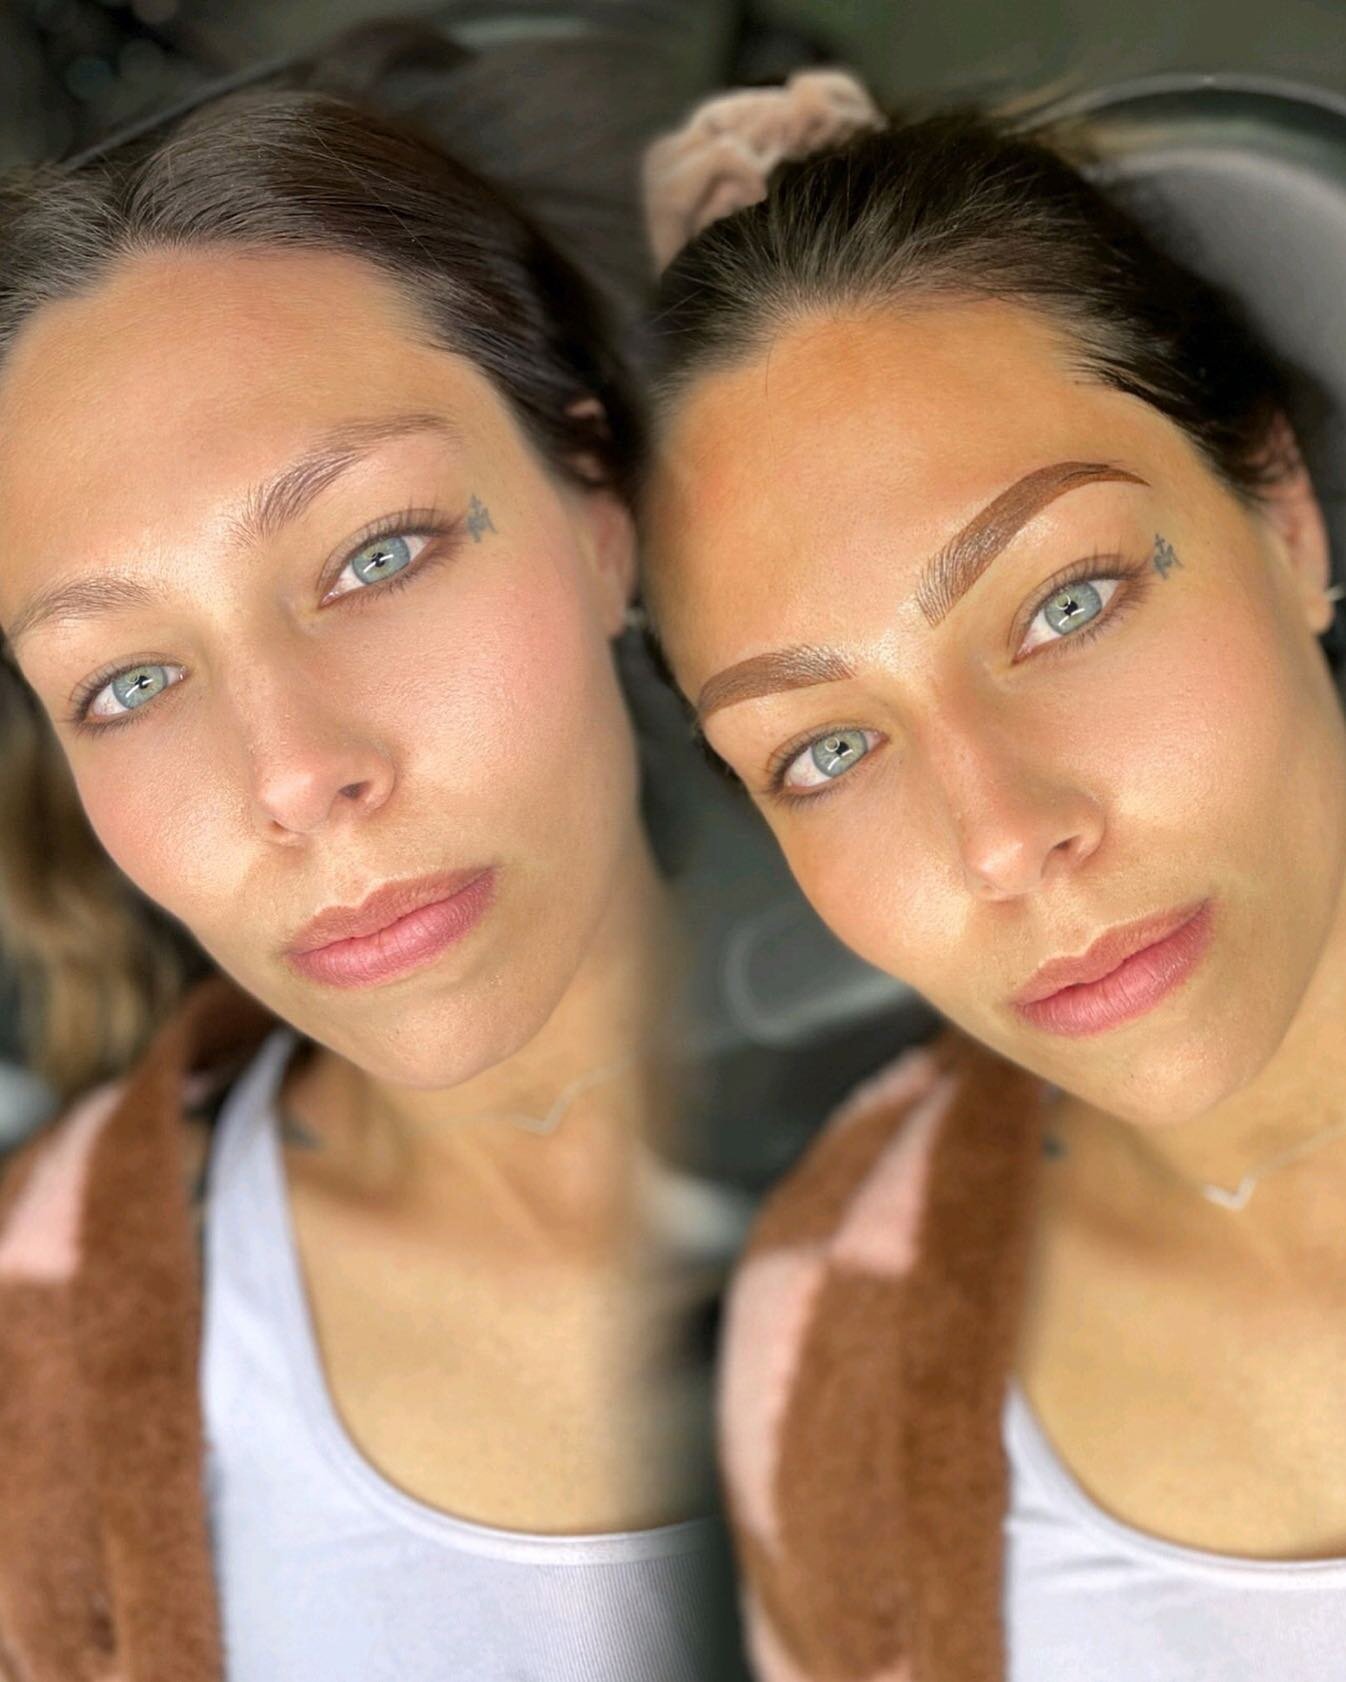 These brows are giving her ✨ᧁꪮᦔᦔꫀᦓᦓ ꪜﺃ᥇ꫀᦓ✨

What I love about #combobrows is that they are so extremely versatile! They can be soft and subtle or bold and make-up-y!

I&rsquo;m expecting these combo brows to heal nice and soft *about 40-50% lighter t